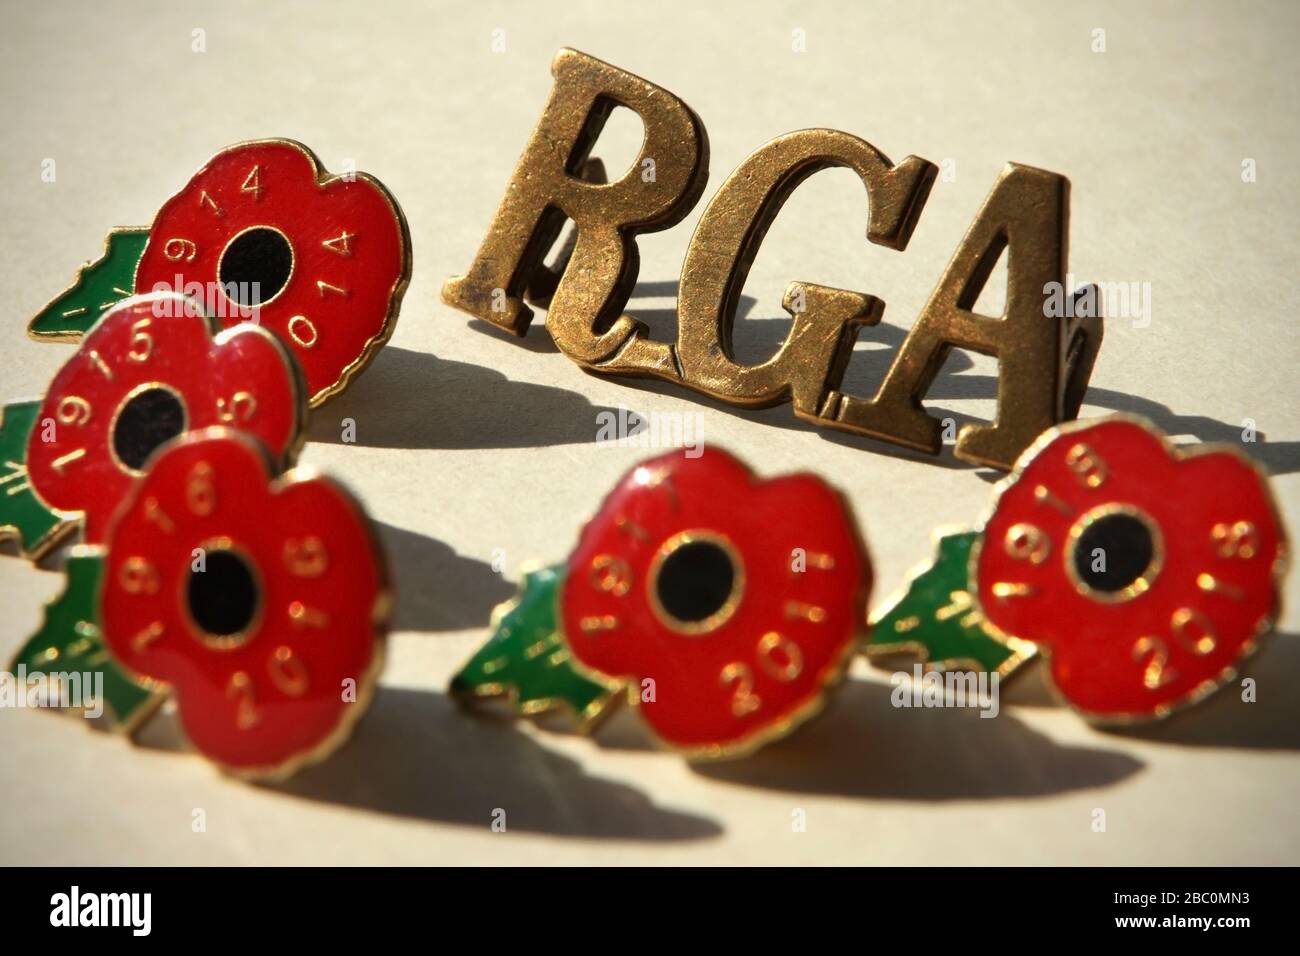 Shoulder title of the Royal Garrison Artillery of the British Army in World War 1, surrounded by poppy pin badges commemorating the war's centenary. Stock Photo